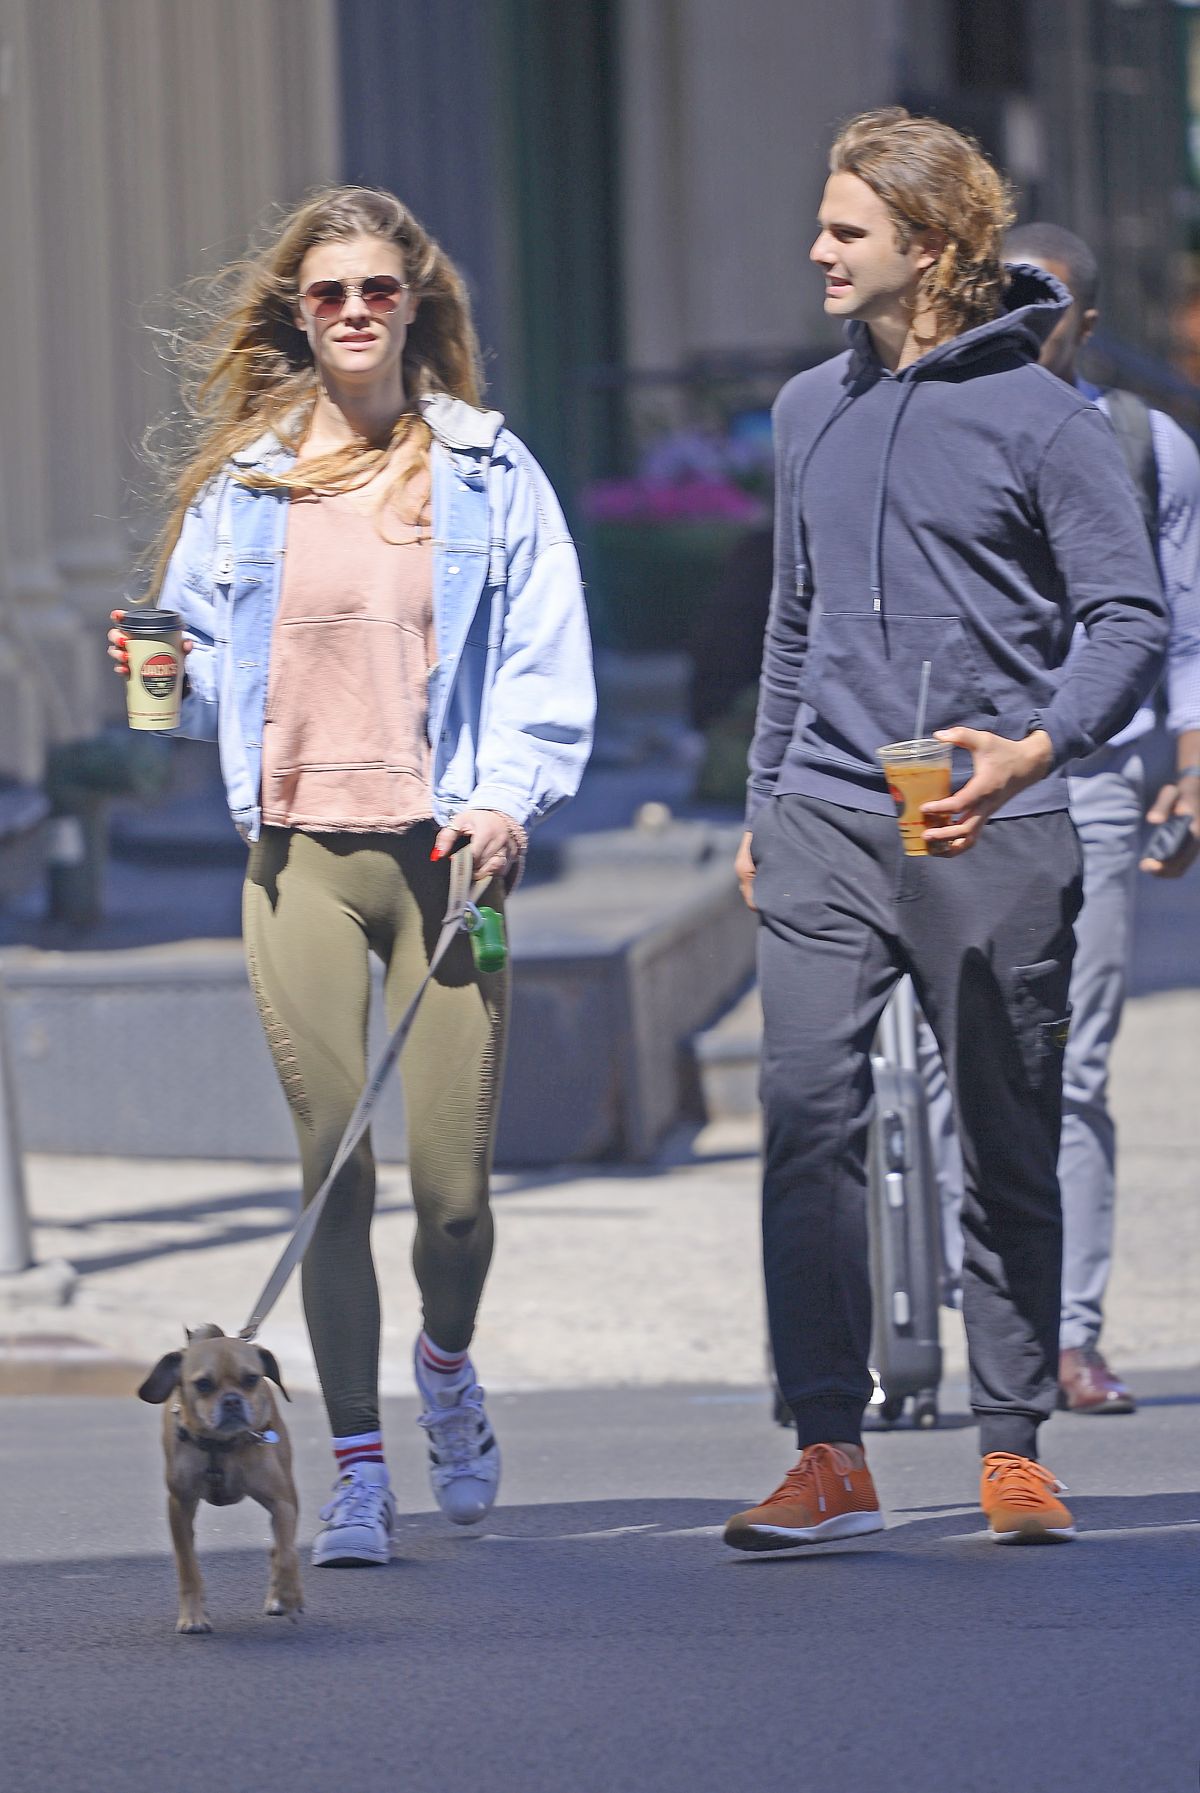 nina-agdal-and-jack-brinkley-with-their-dog-out-in-new-york-04-24-2019-5.jpg